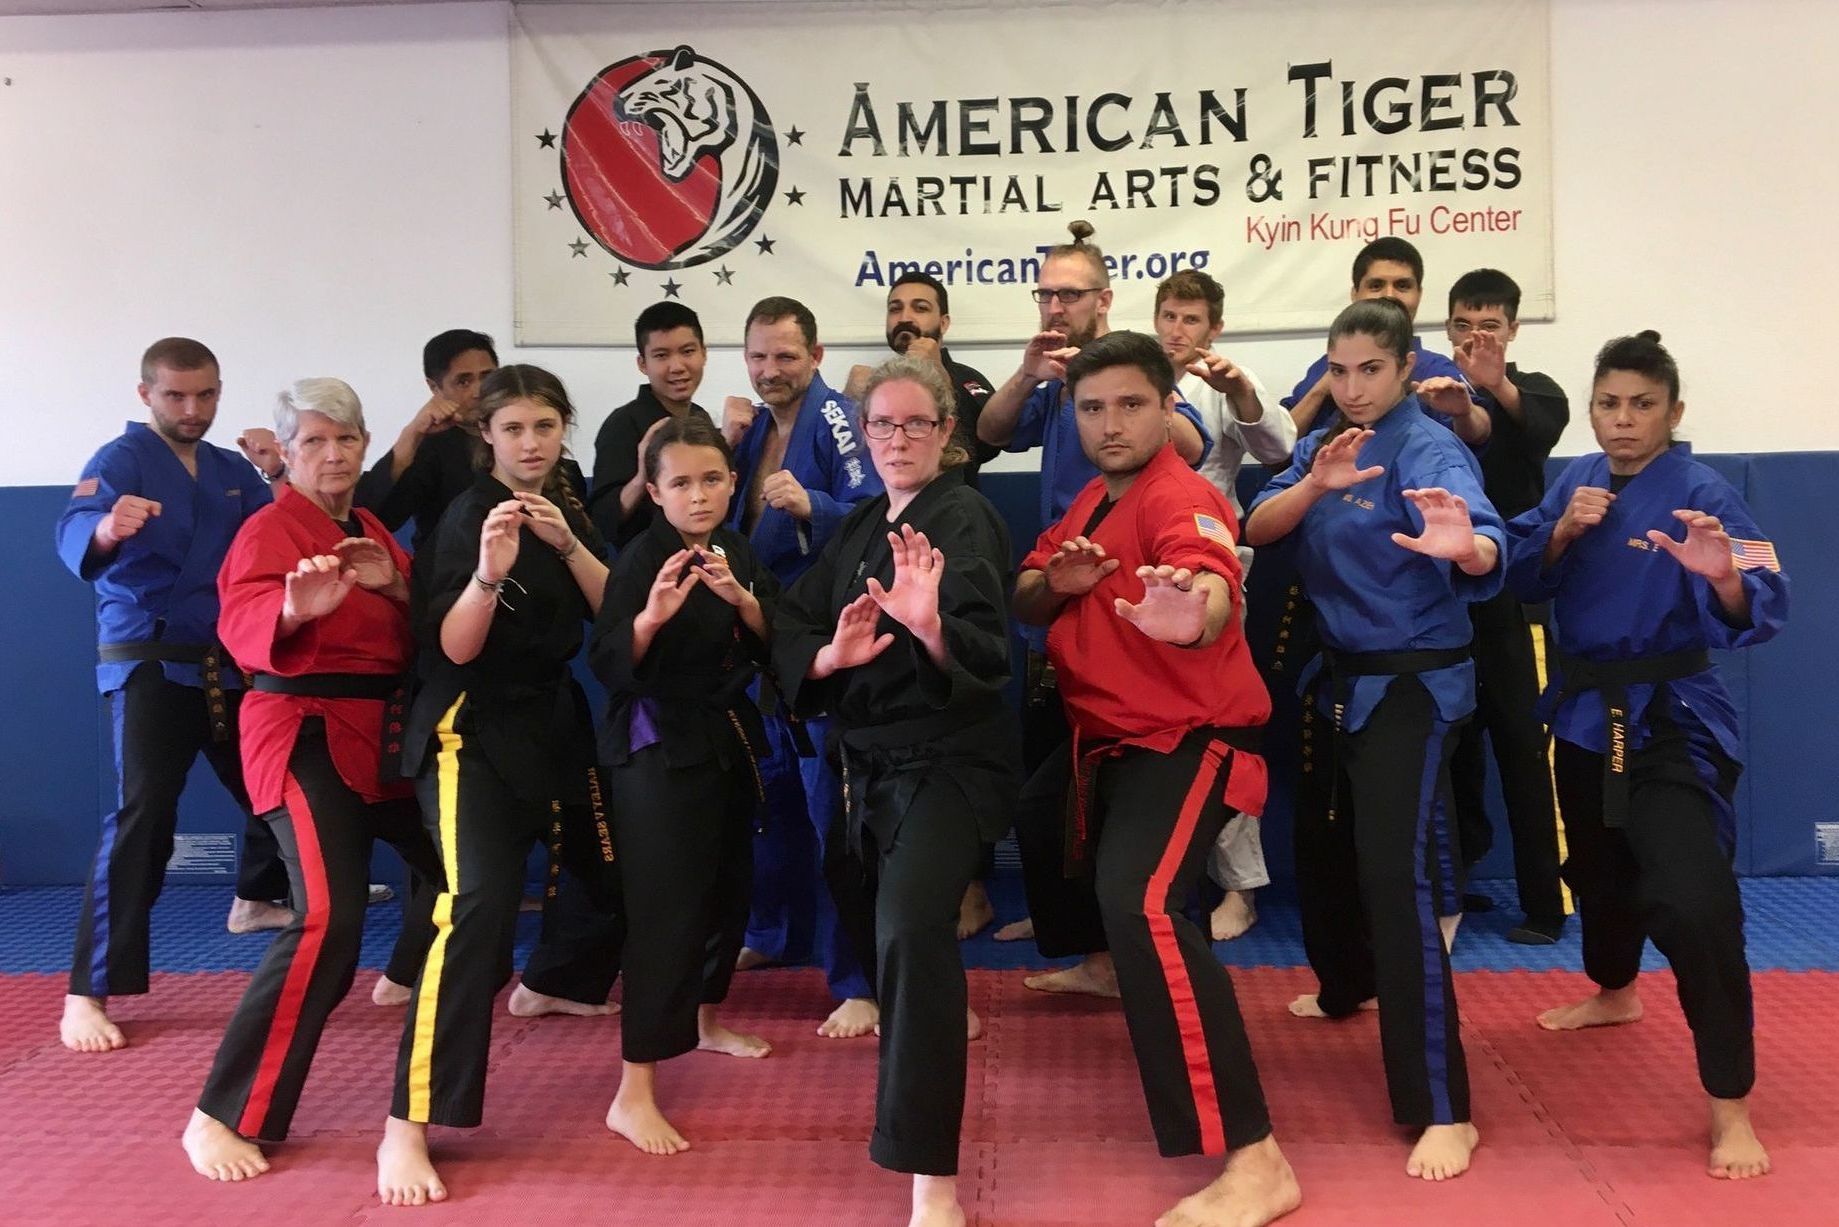 A group of people are standing in front of a sign that says american tiger martial arts & fitness